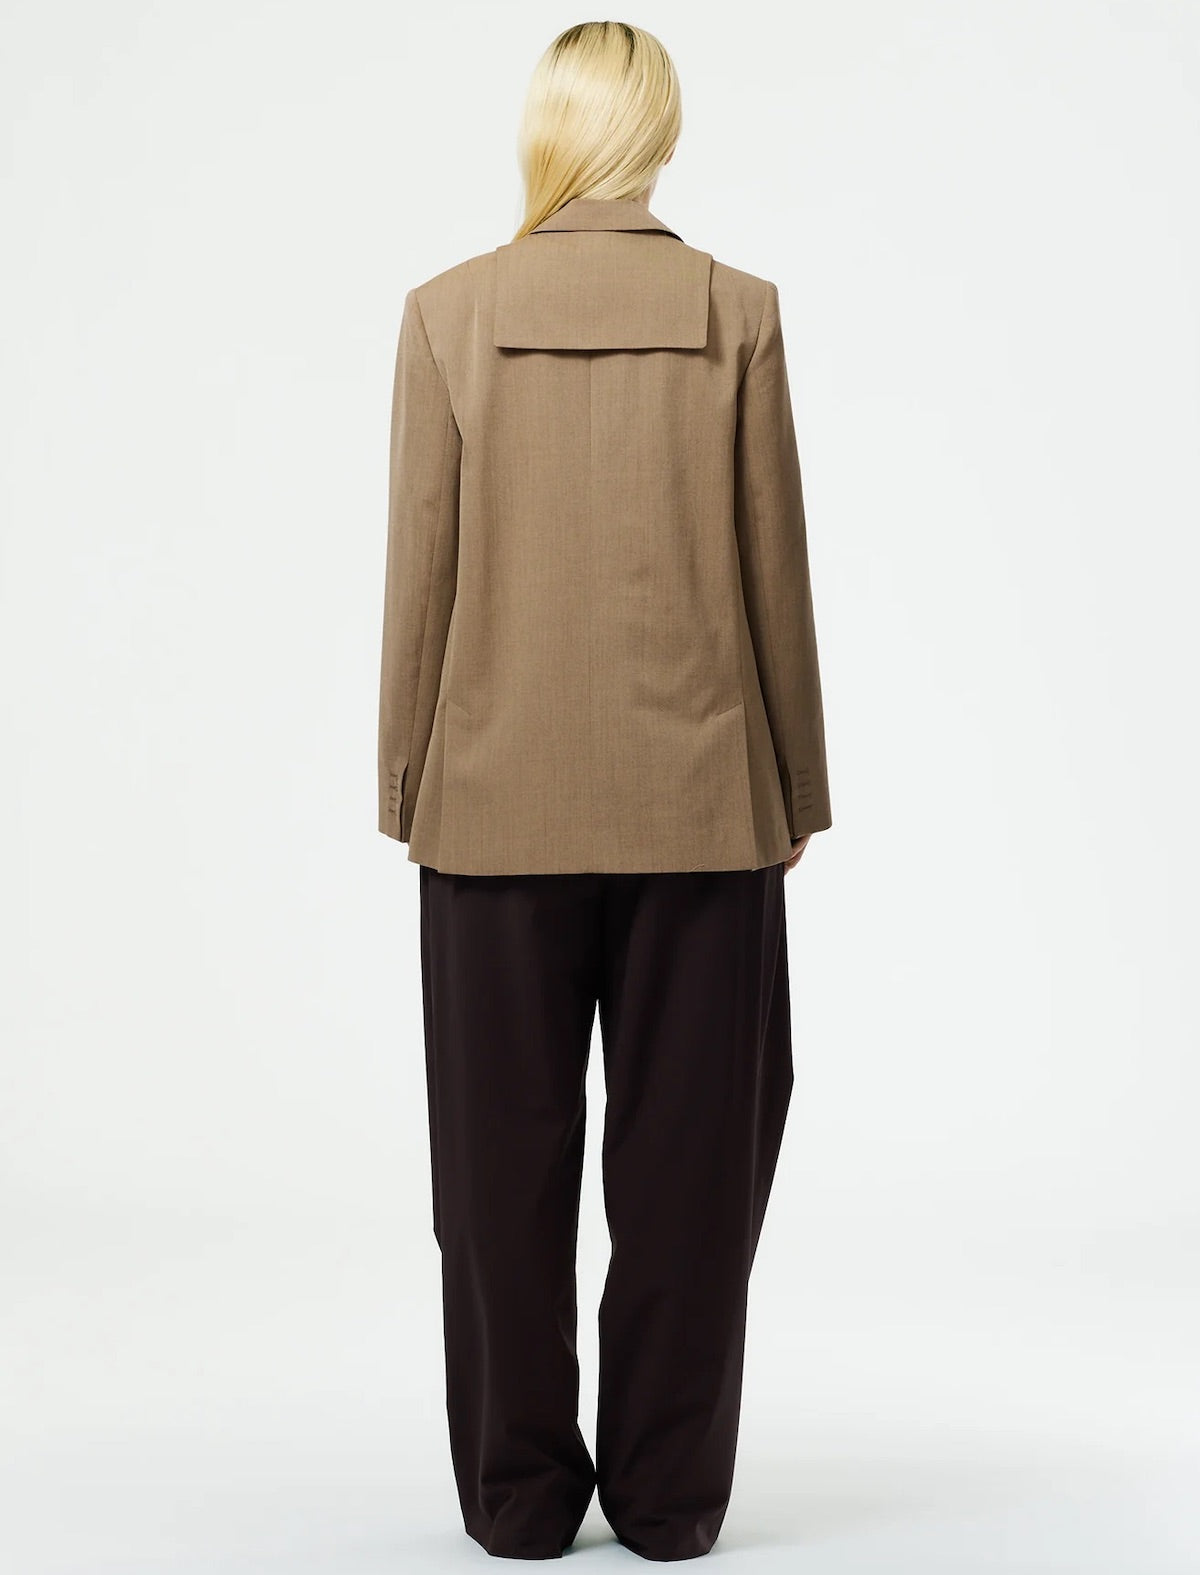 TIBI Refined Wool Tricotine Suiting Blazer in Tan